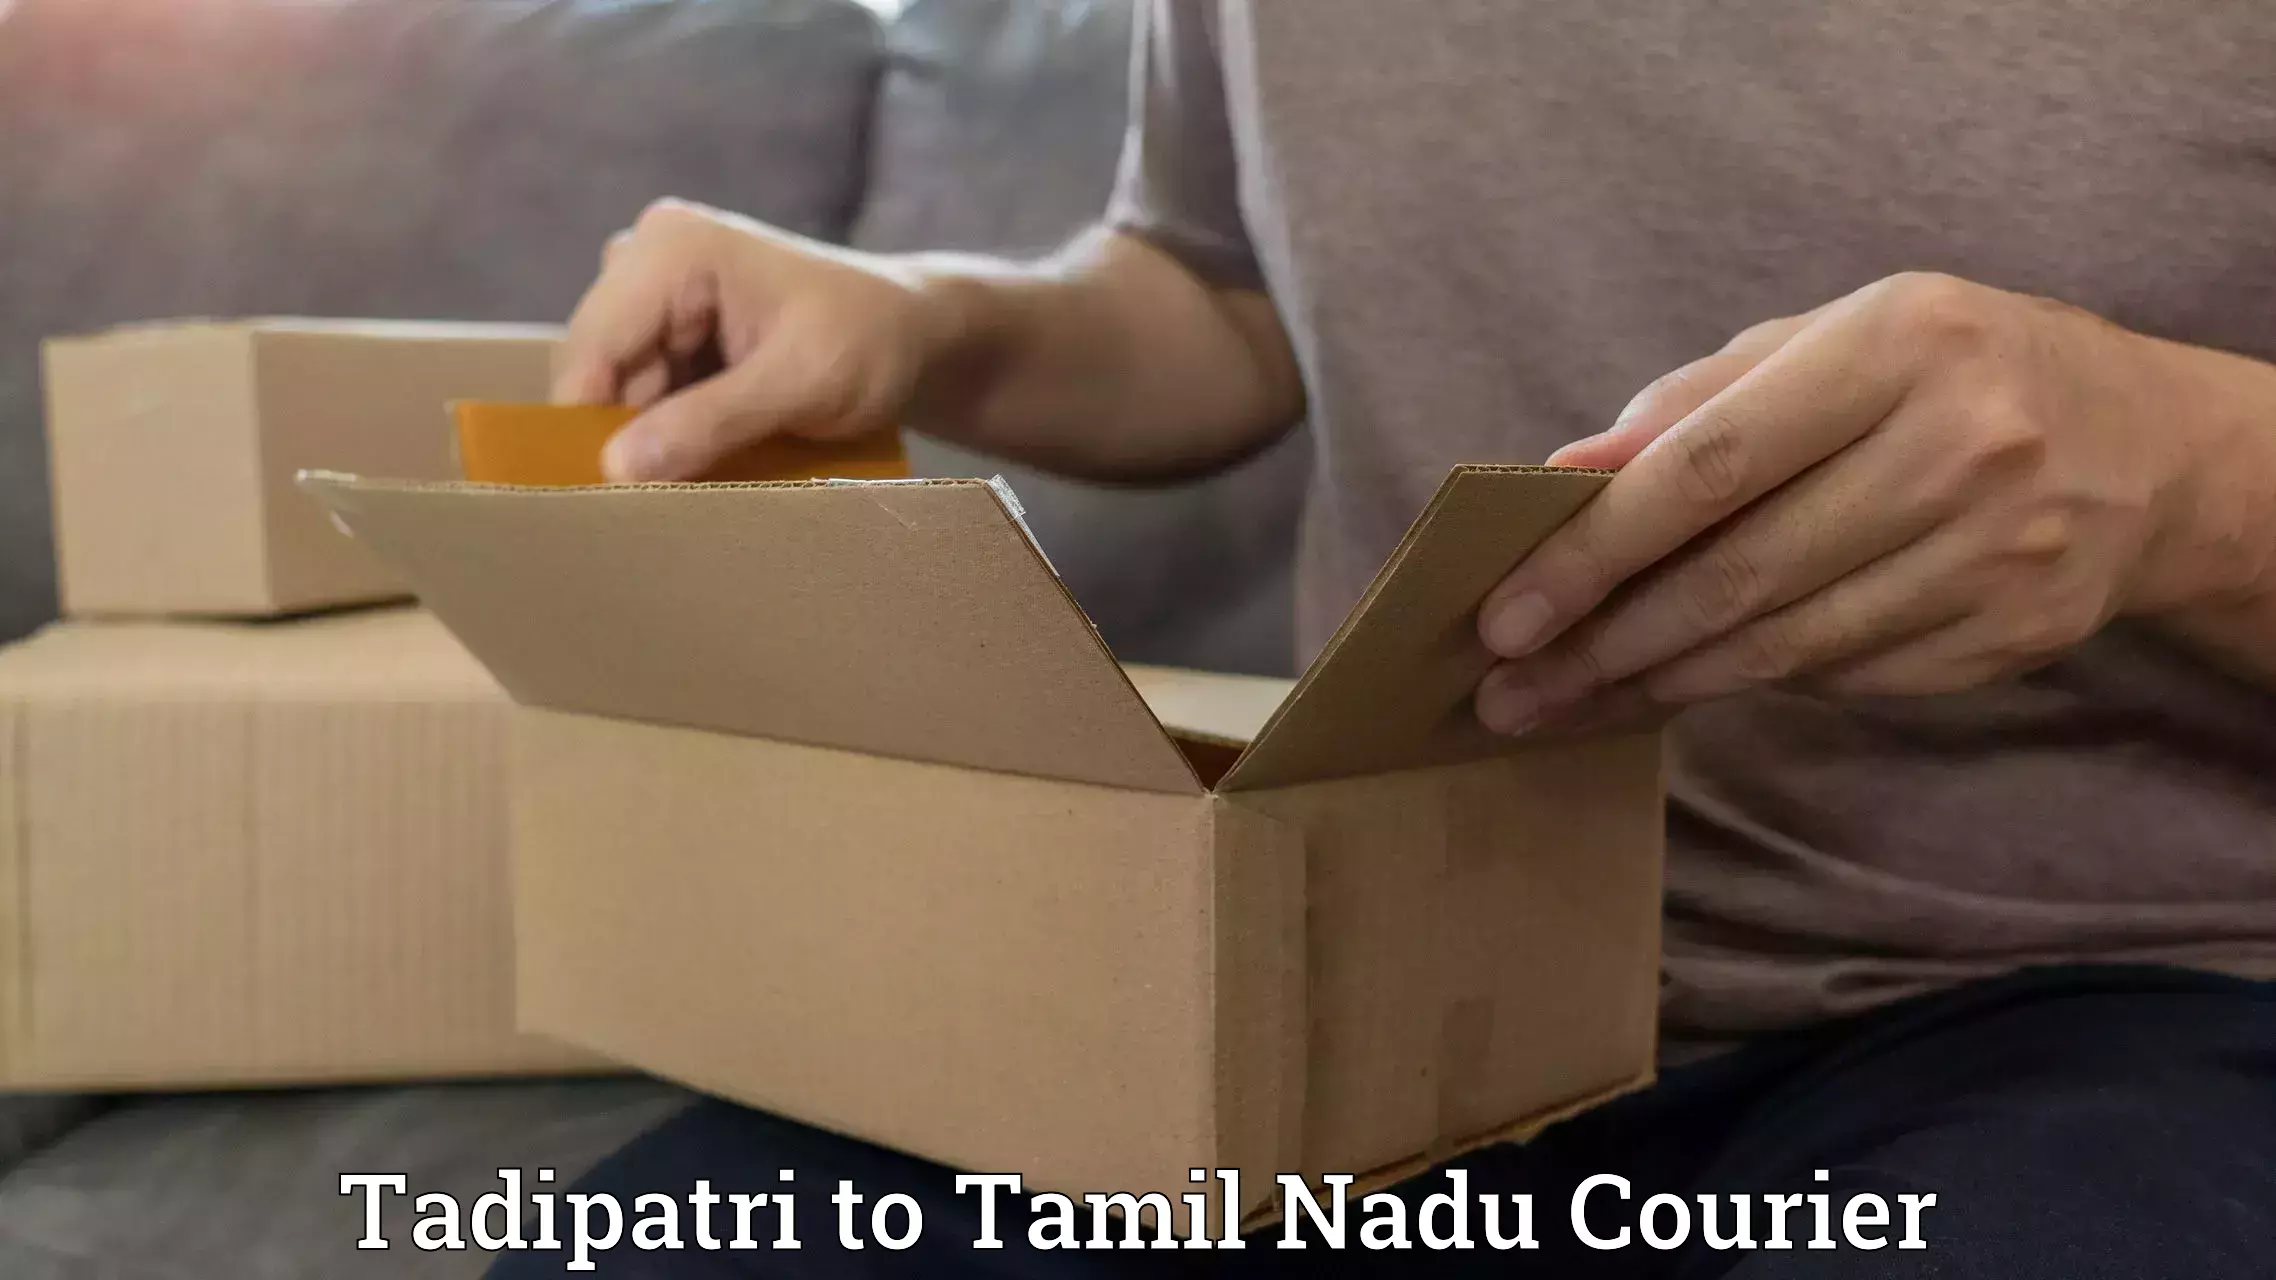 Customizable delivery plans Tadipatri to Vellore